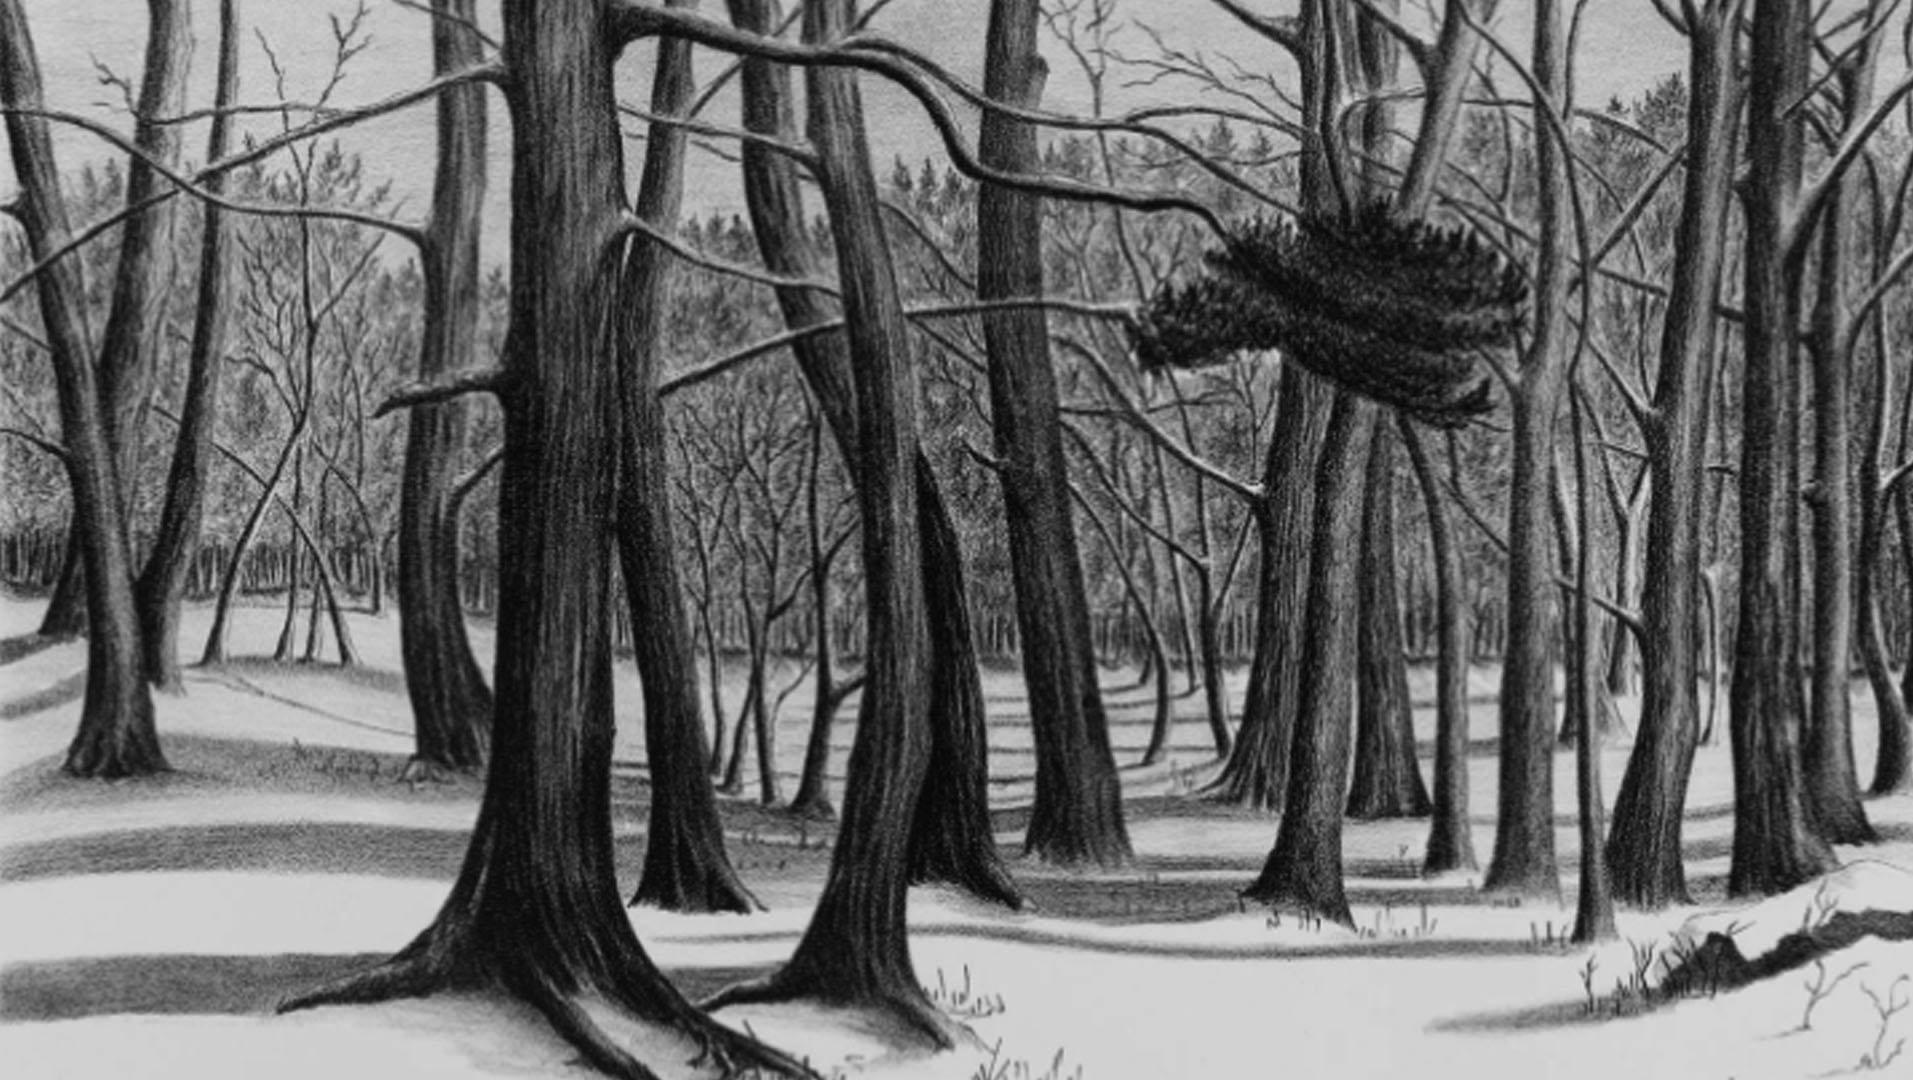 “Winter Peace” by Grant Arnold, circa 1930s, is among the pieces on display for Grant Arnold and the Golden Era of Woodstock Lithography – 1930-1940,” running from March 1 to 30 in SUNY Oswego’s Tyler Art Gallery.